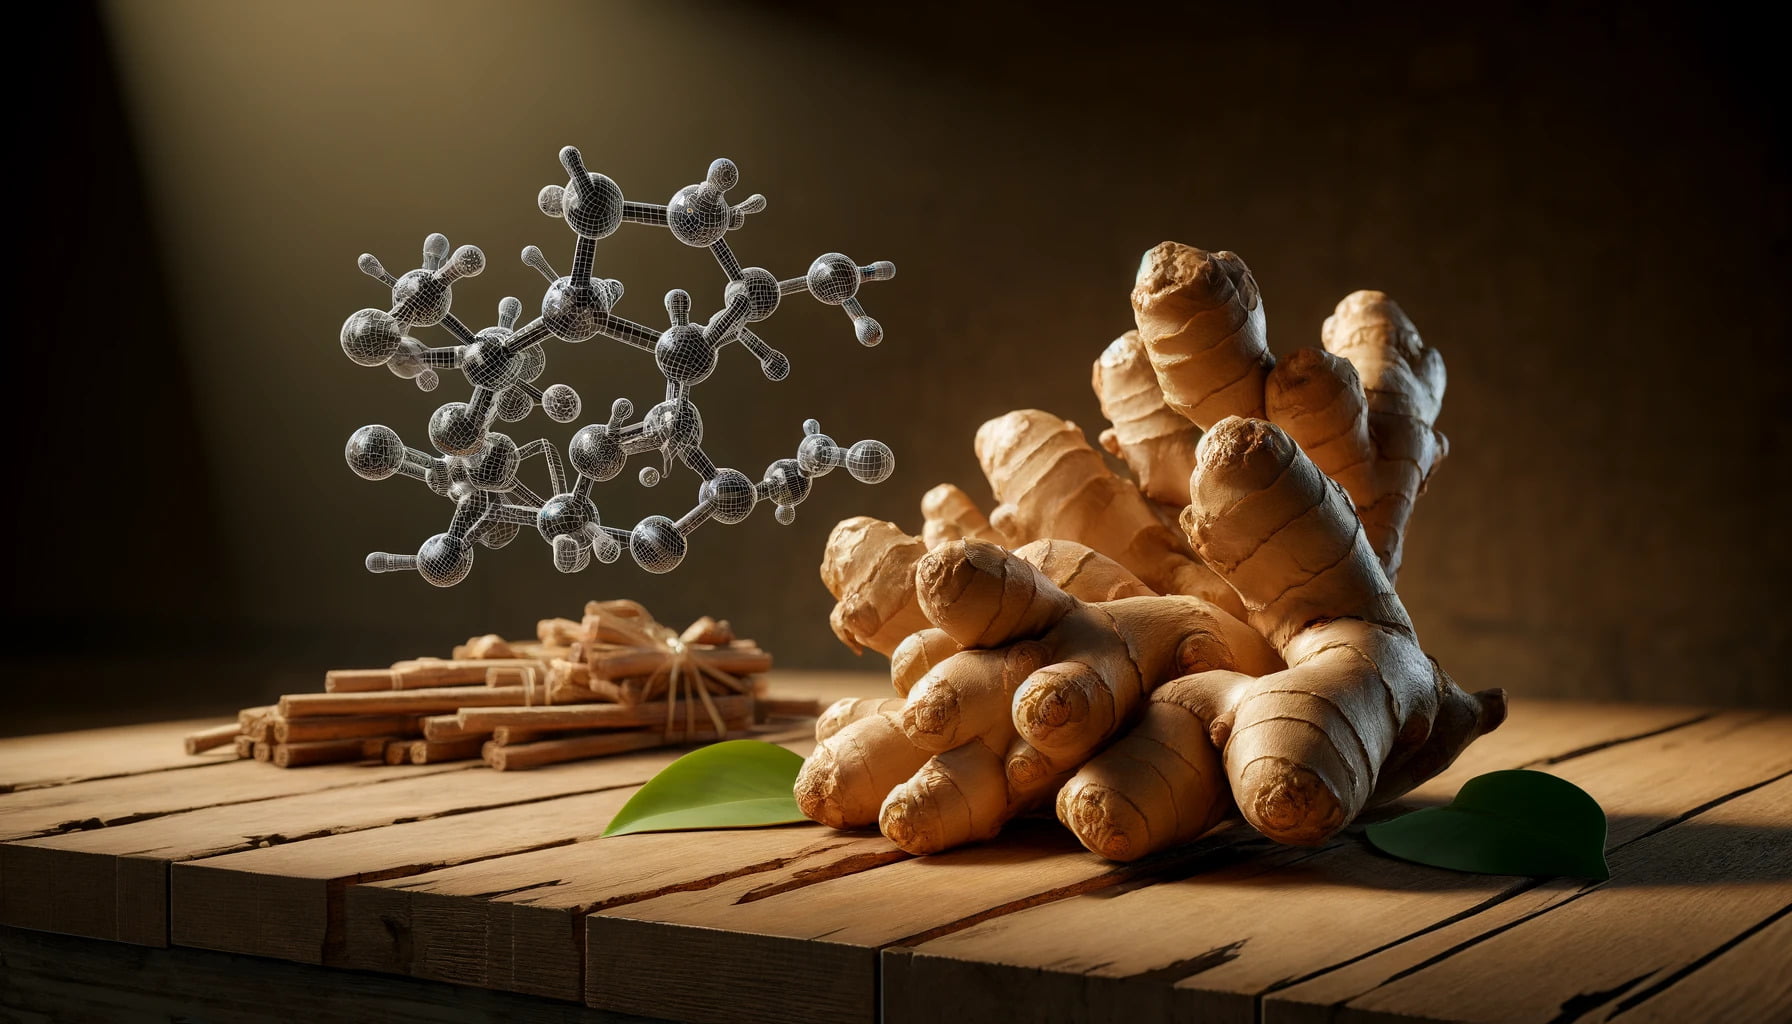 A photorealistic image of fresh ginger roots on a wooden surface, alongside a depiction of its molecular structure. 